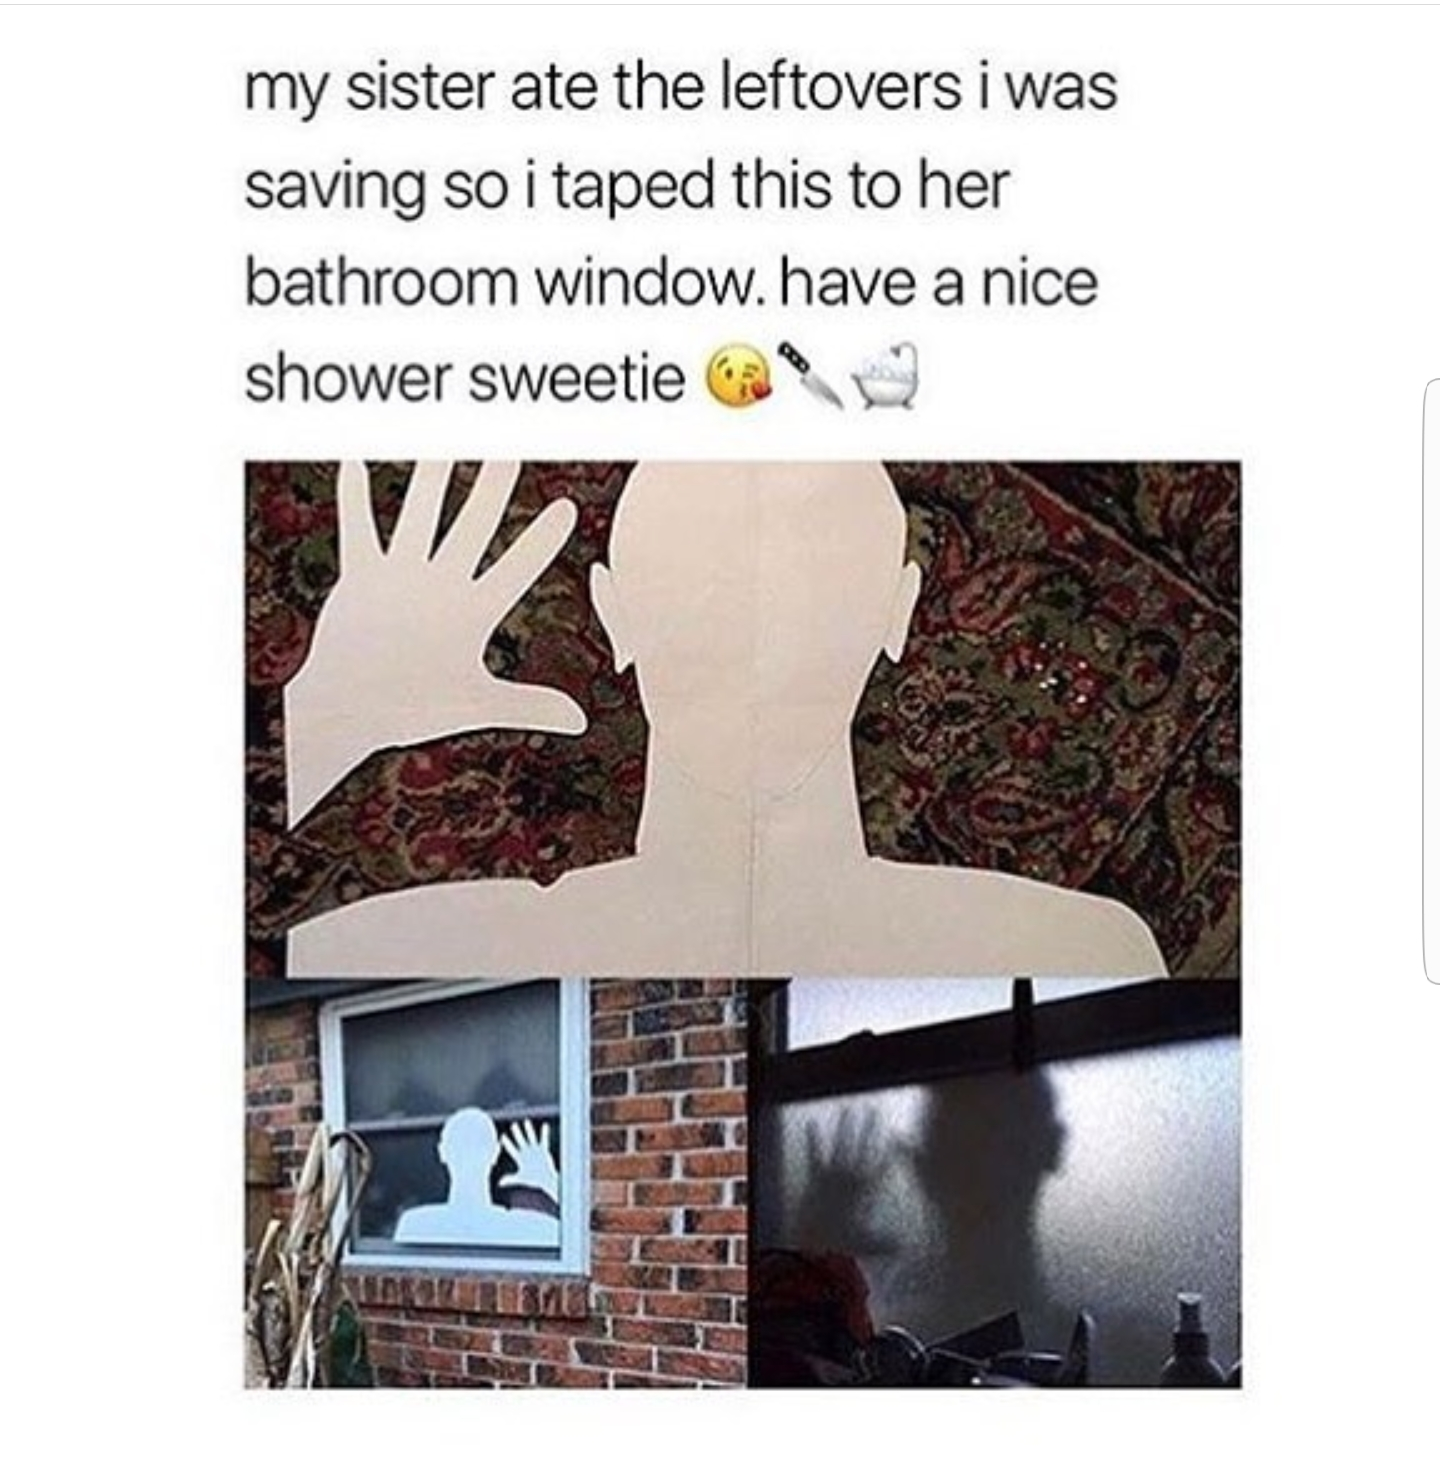 memes - funny sibling rivalry memes - my sister ate the leftovers i was saving so i taped this to her bathroom window. have a nice shower sweetie